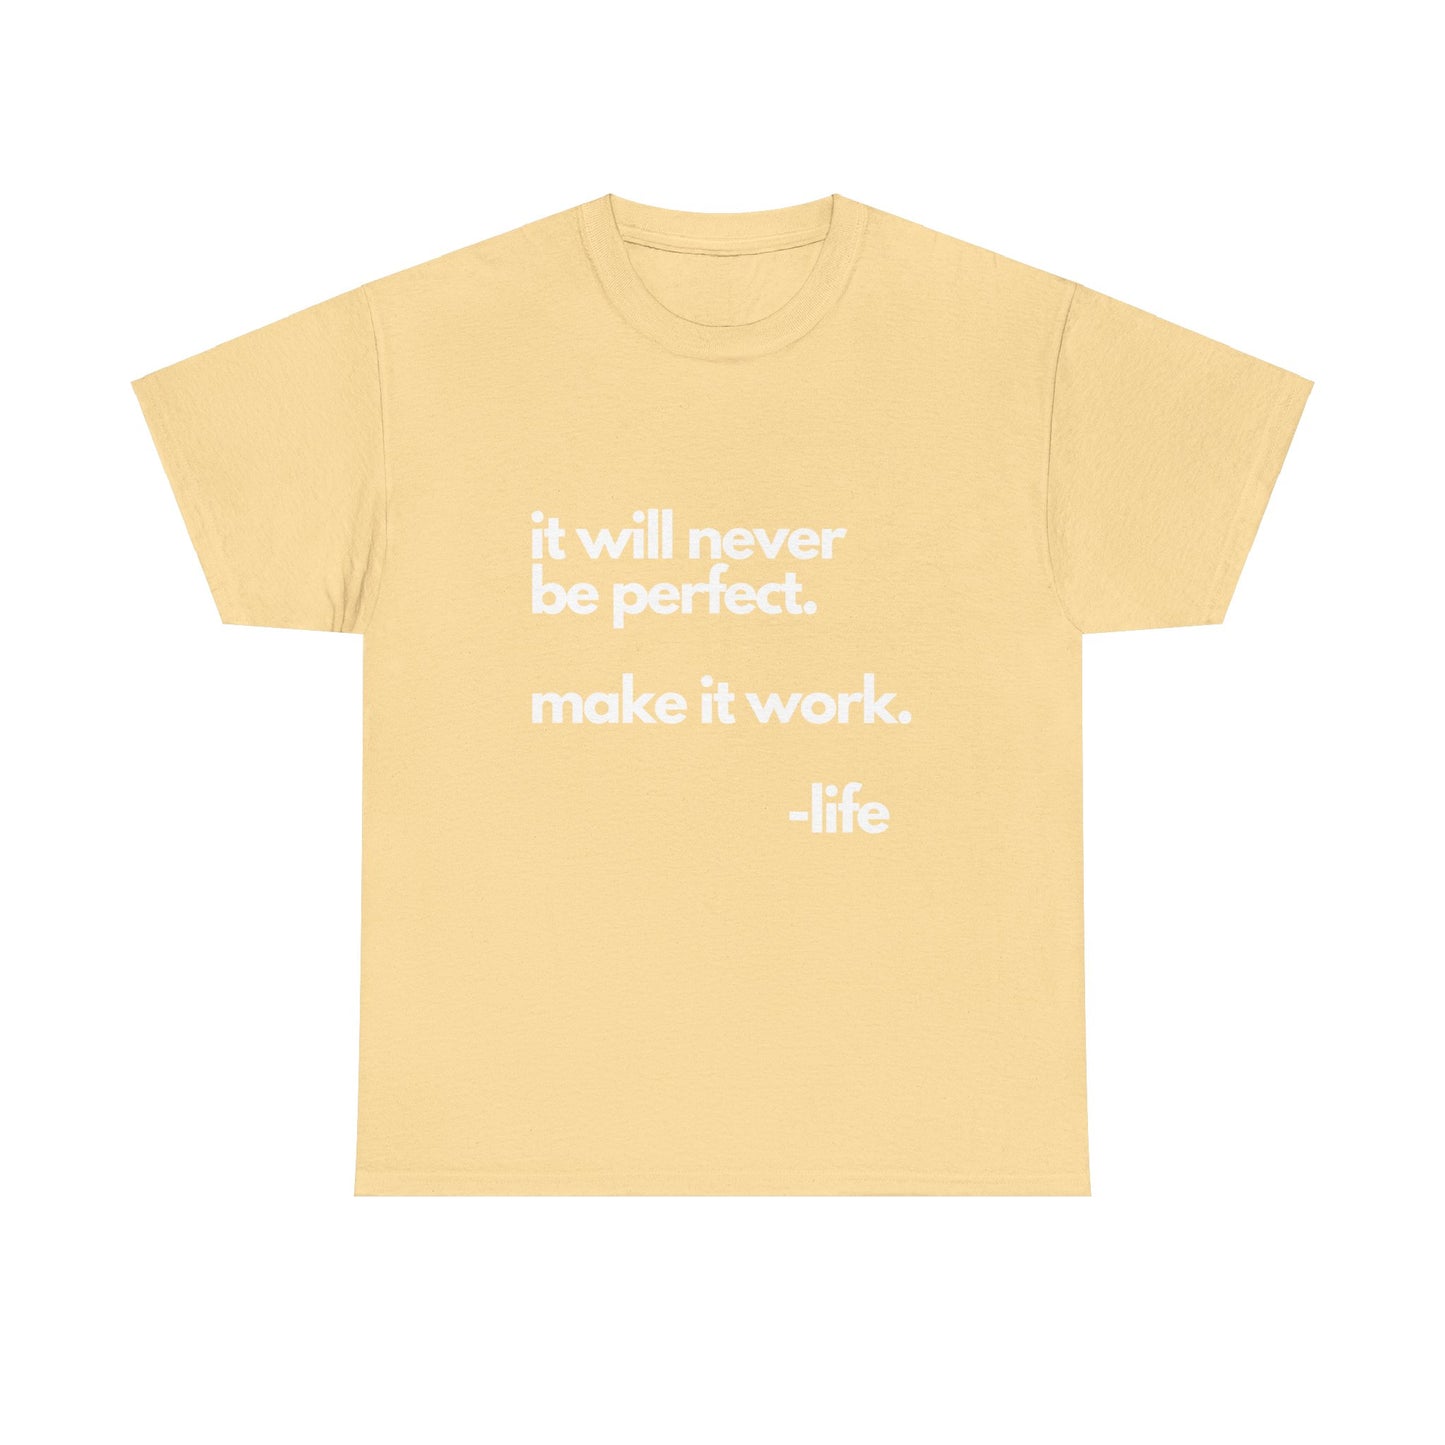 It’s not perfect make it work -LifeUnisex Heavy Cotton Tee